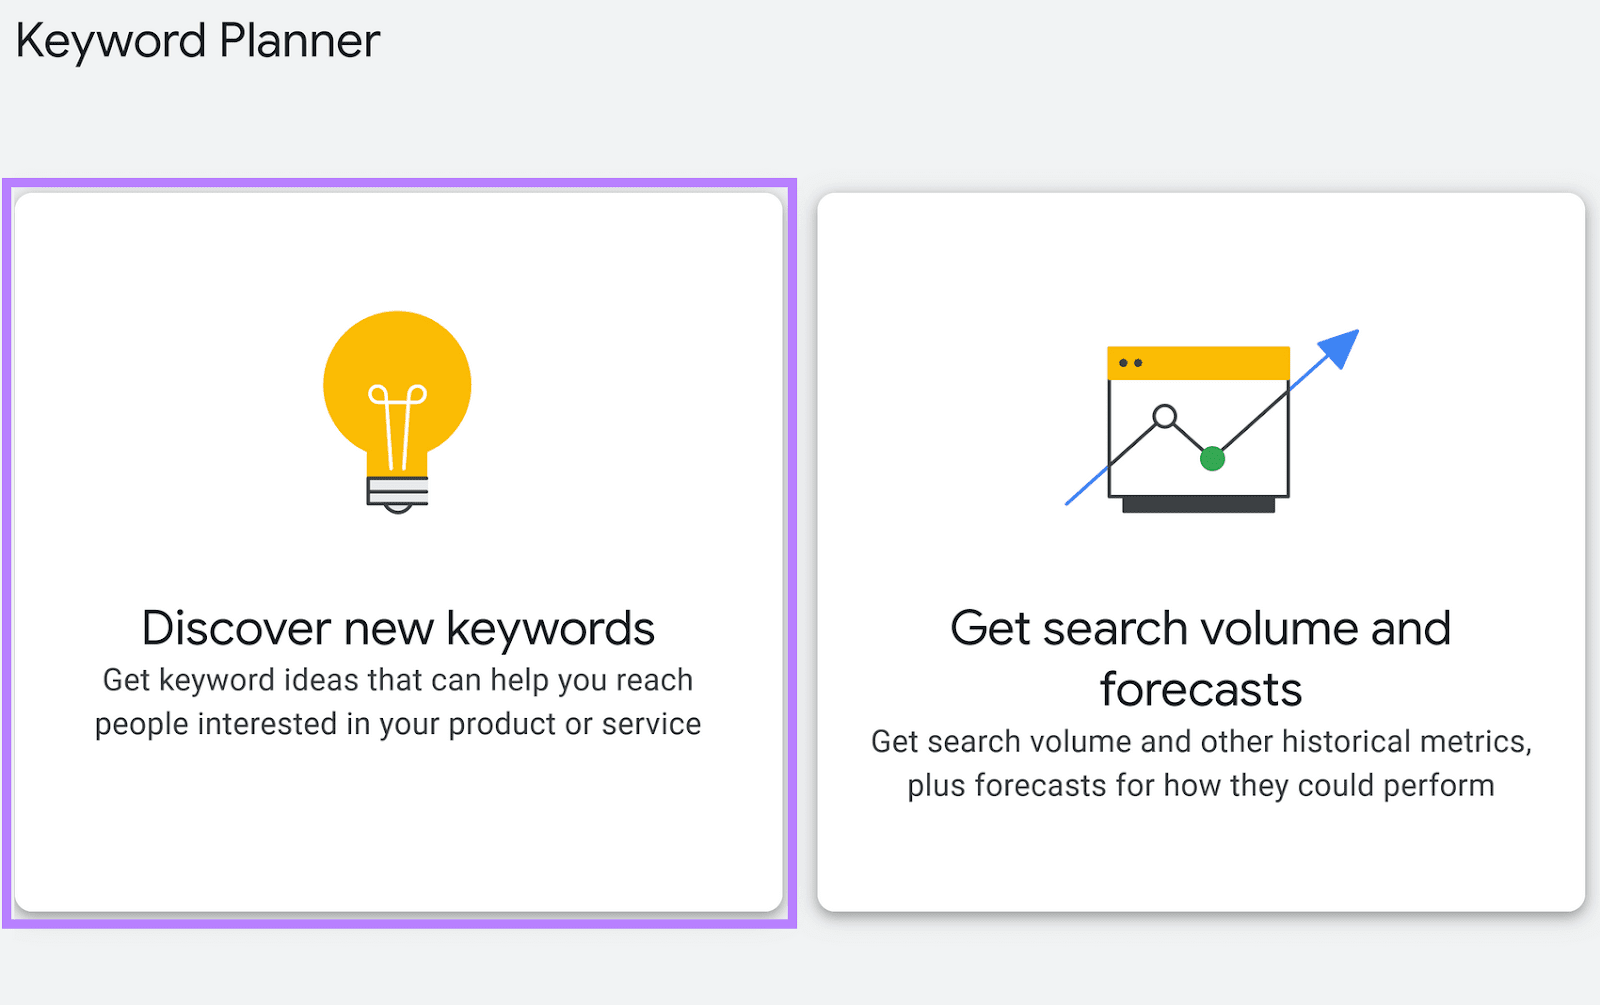 “Discover new keywords” option selected in Keyword Planner